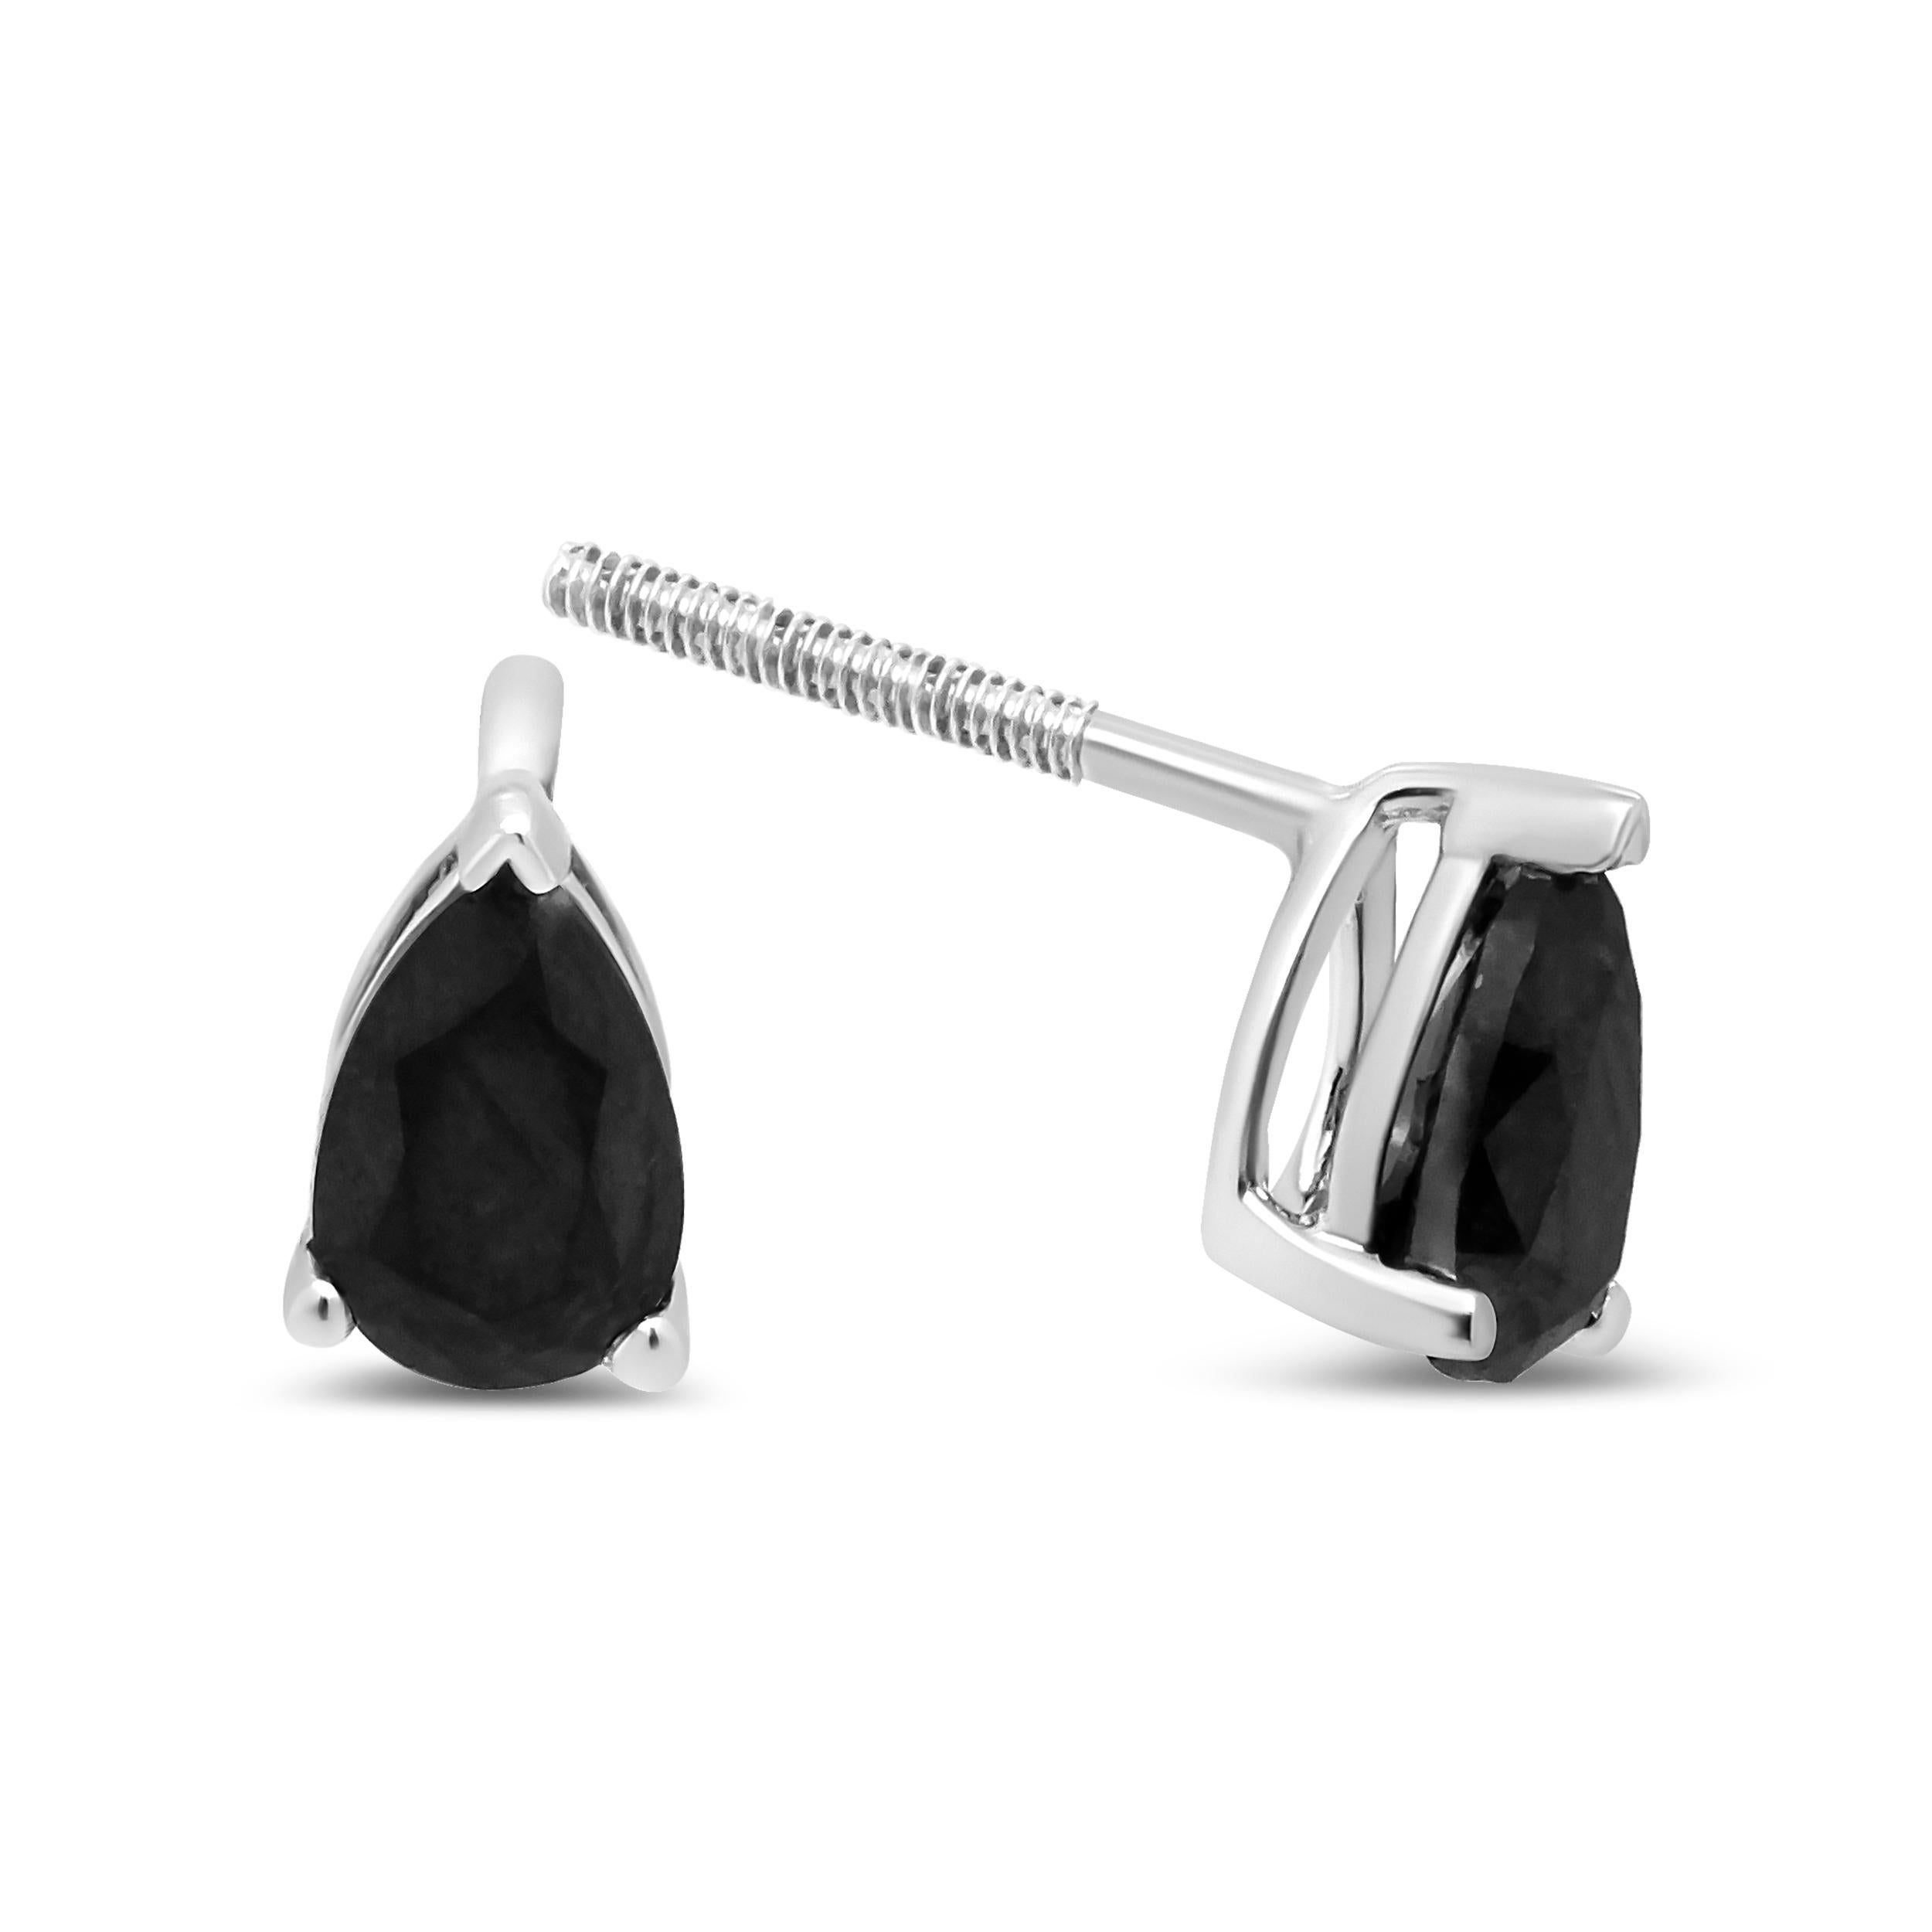 Modern 14K White Gold 1.0 Cttw Treated Black Pear Shaped Solitaire Diamond Stud Earring For Sale